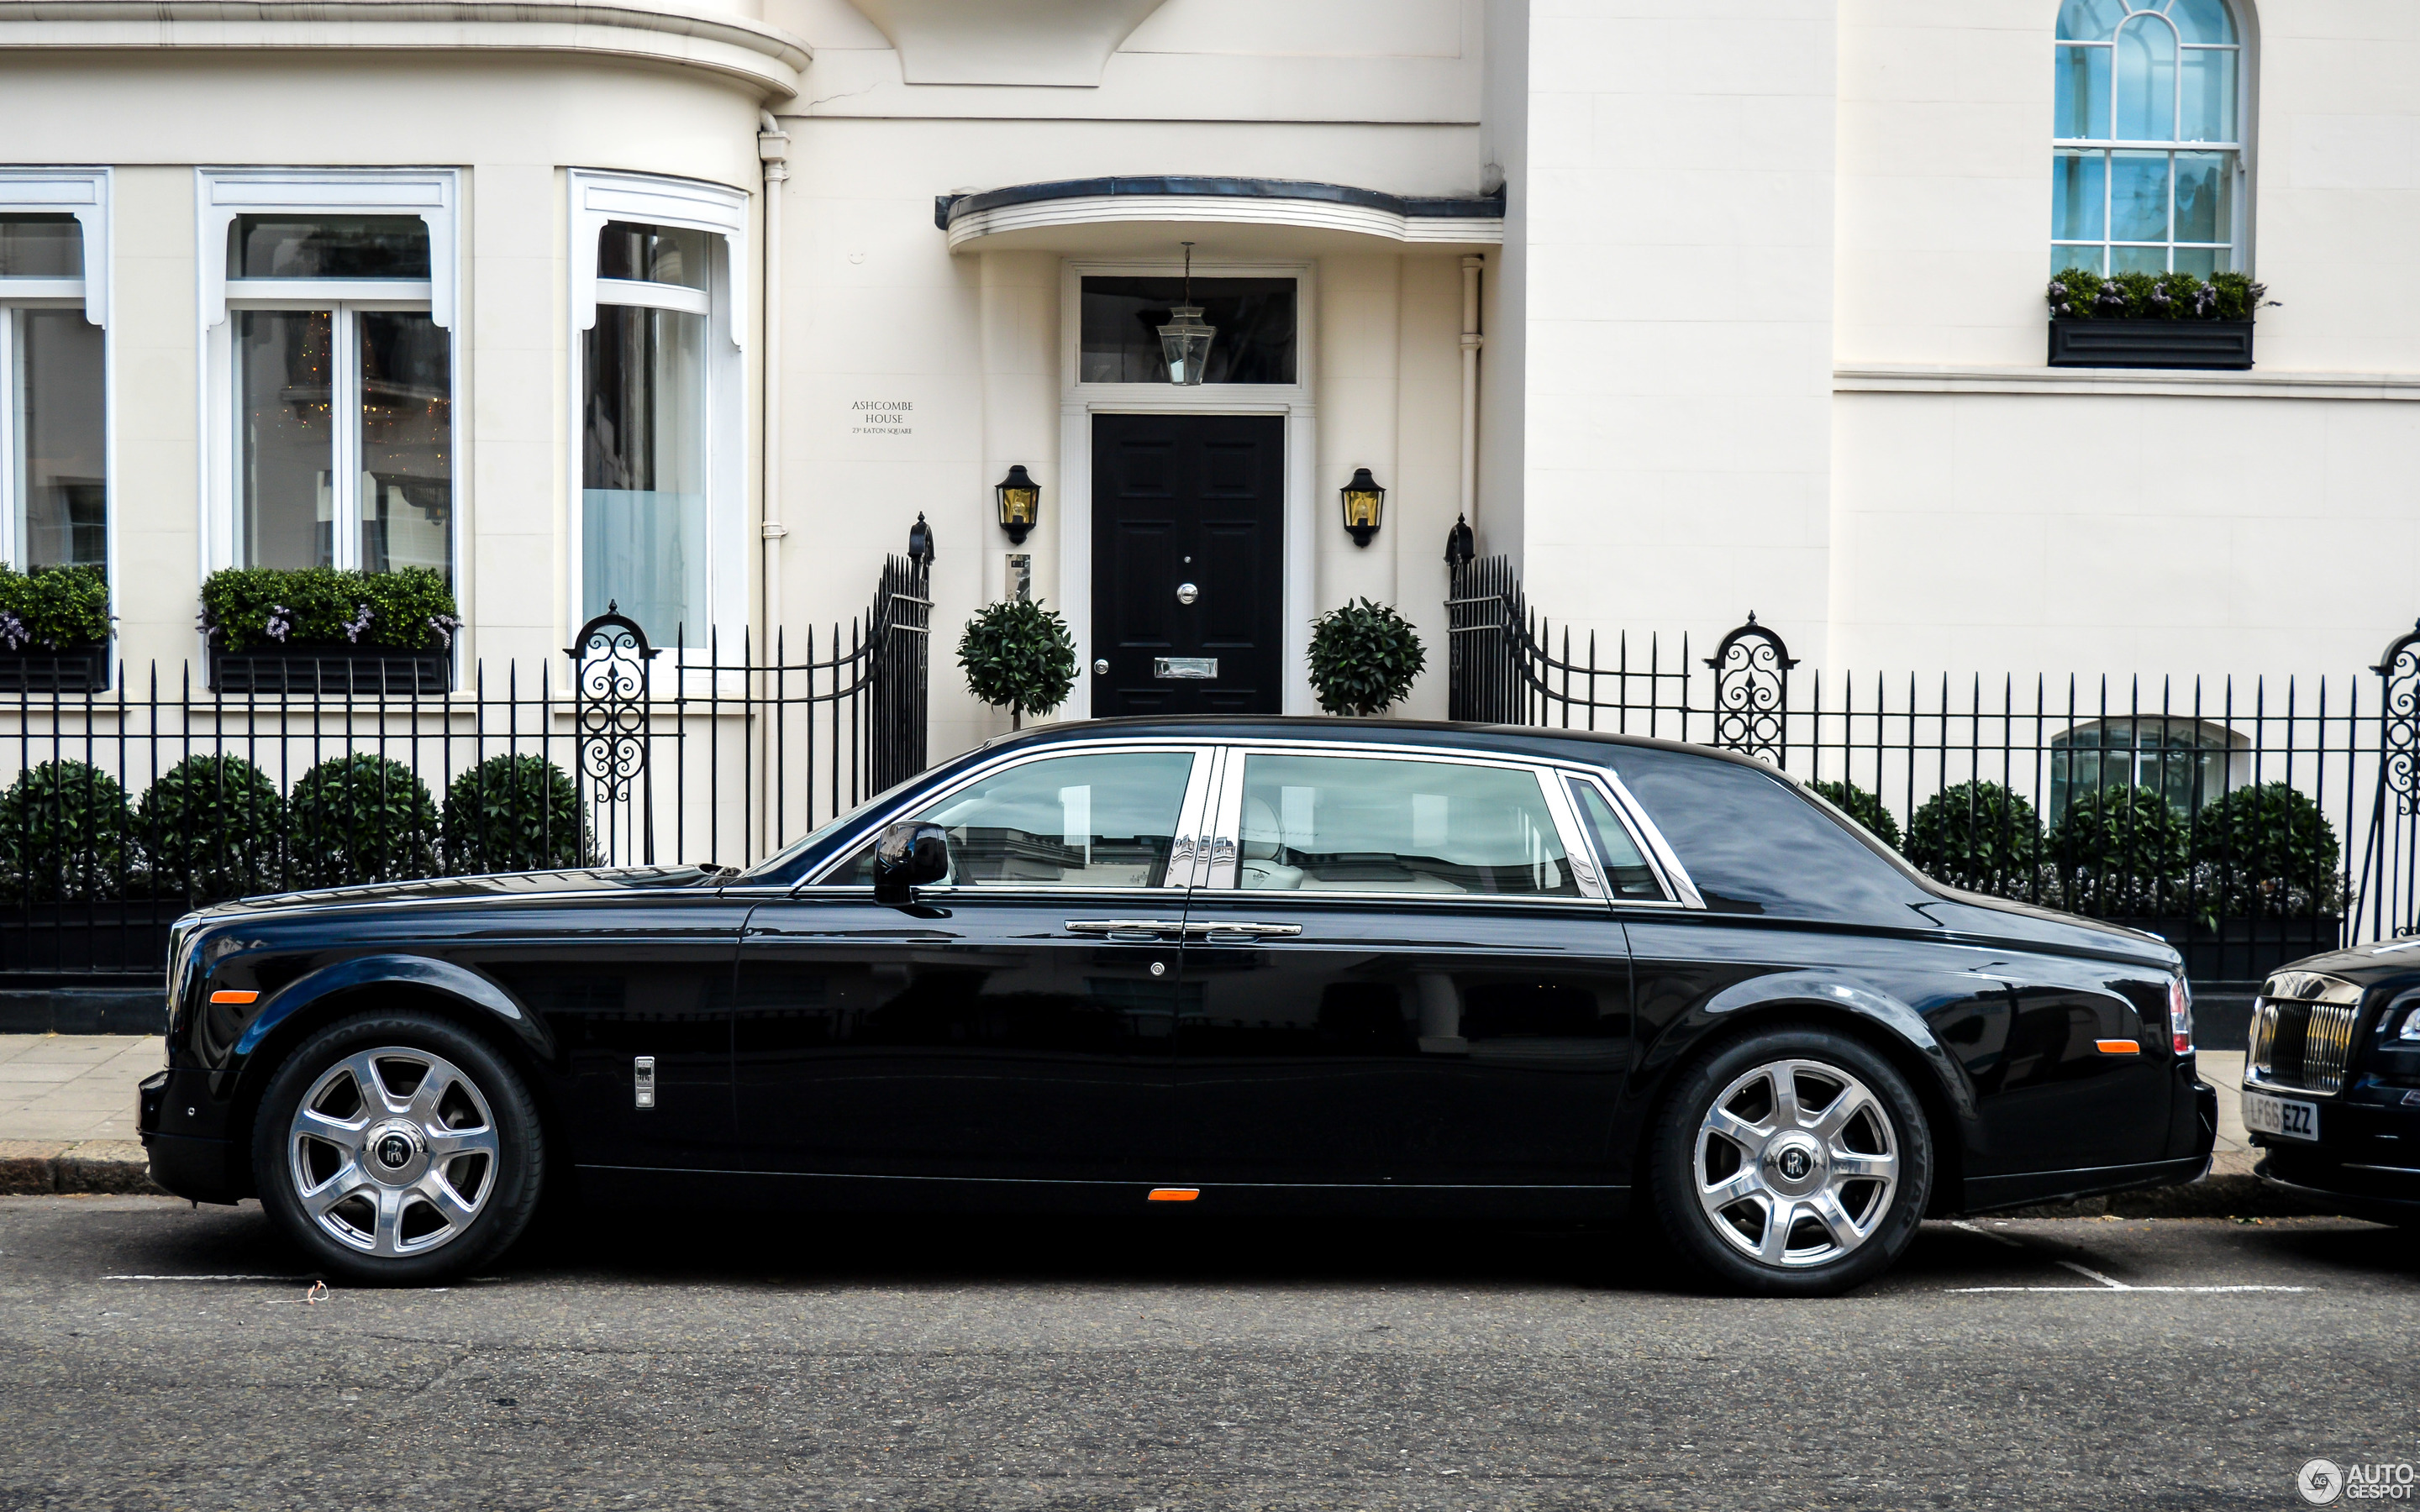 General 2880x1800 car Rolls-Royce luxury cars British cars side view building watermarked logo vehicle